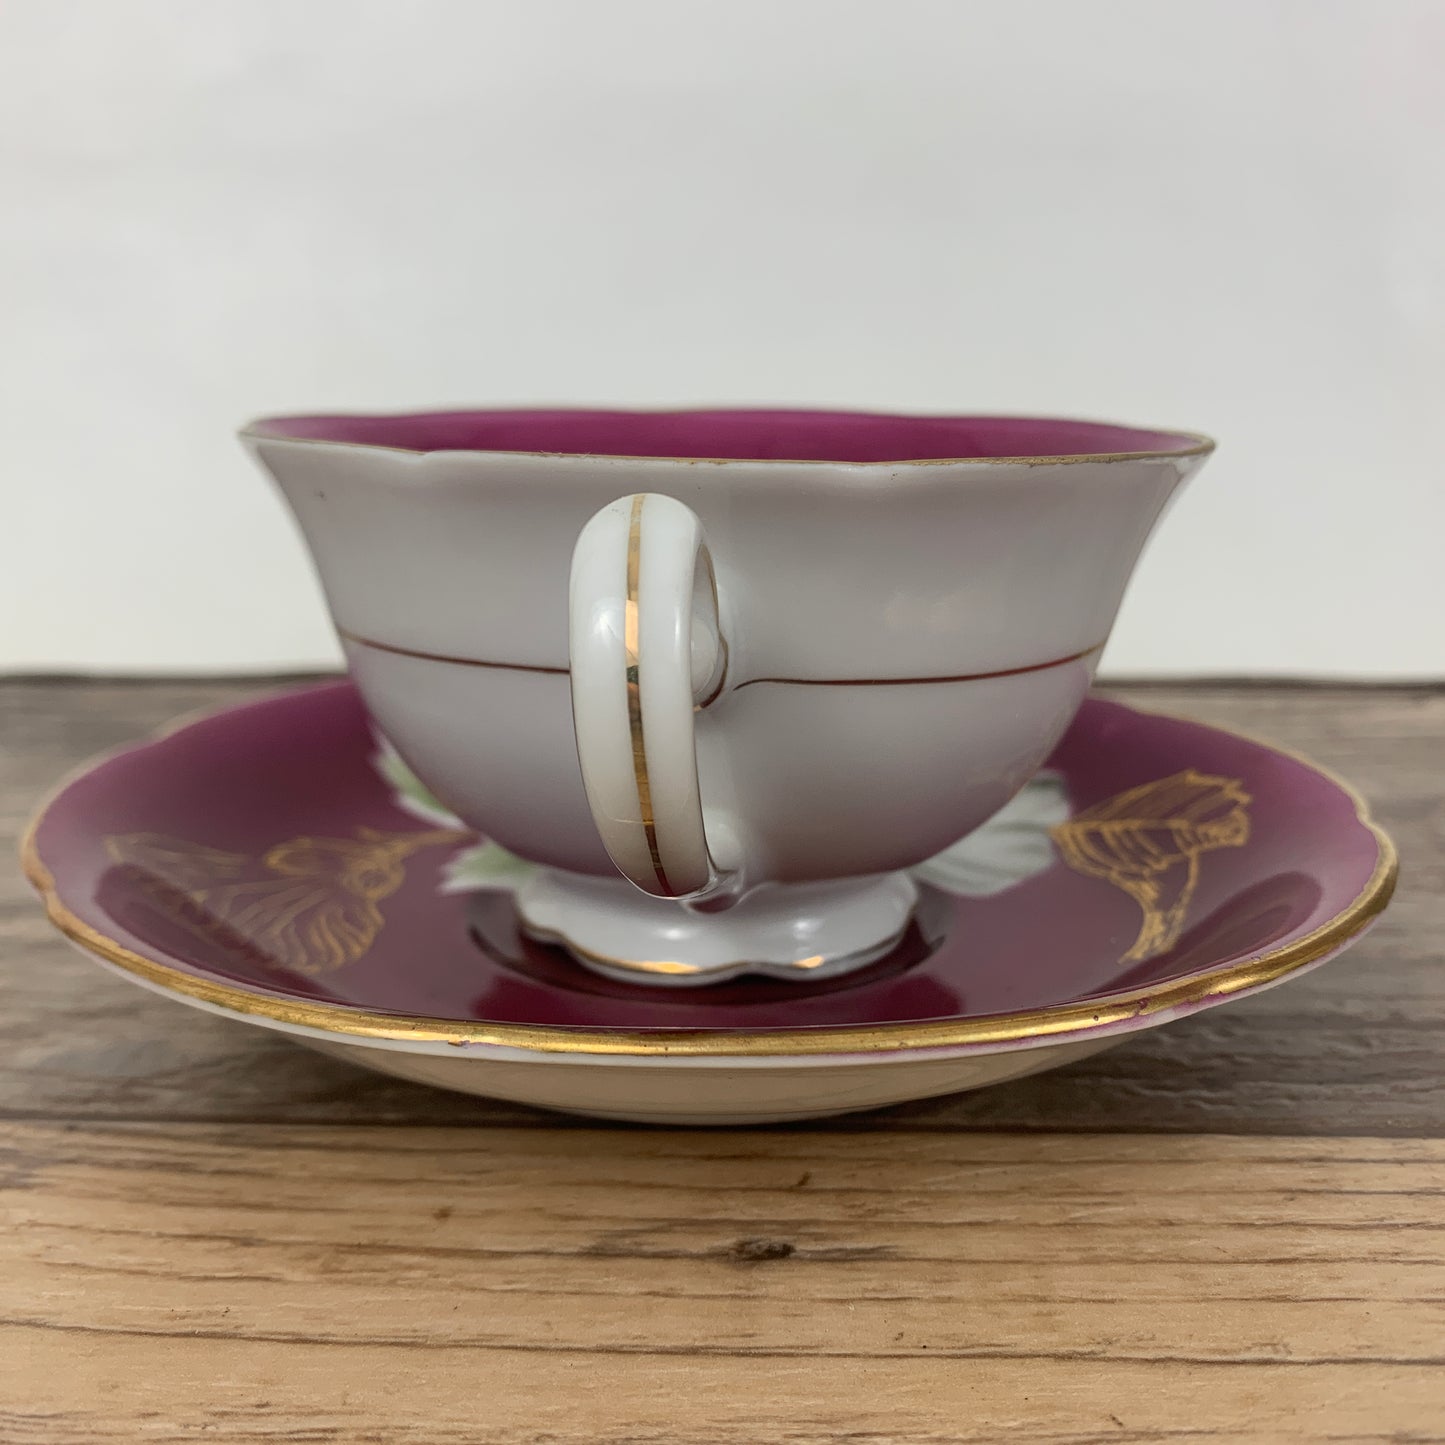 Maroon Teacup and Saucer with Hand Painted Flower Occupied Japan Teacup and Saucer